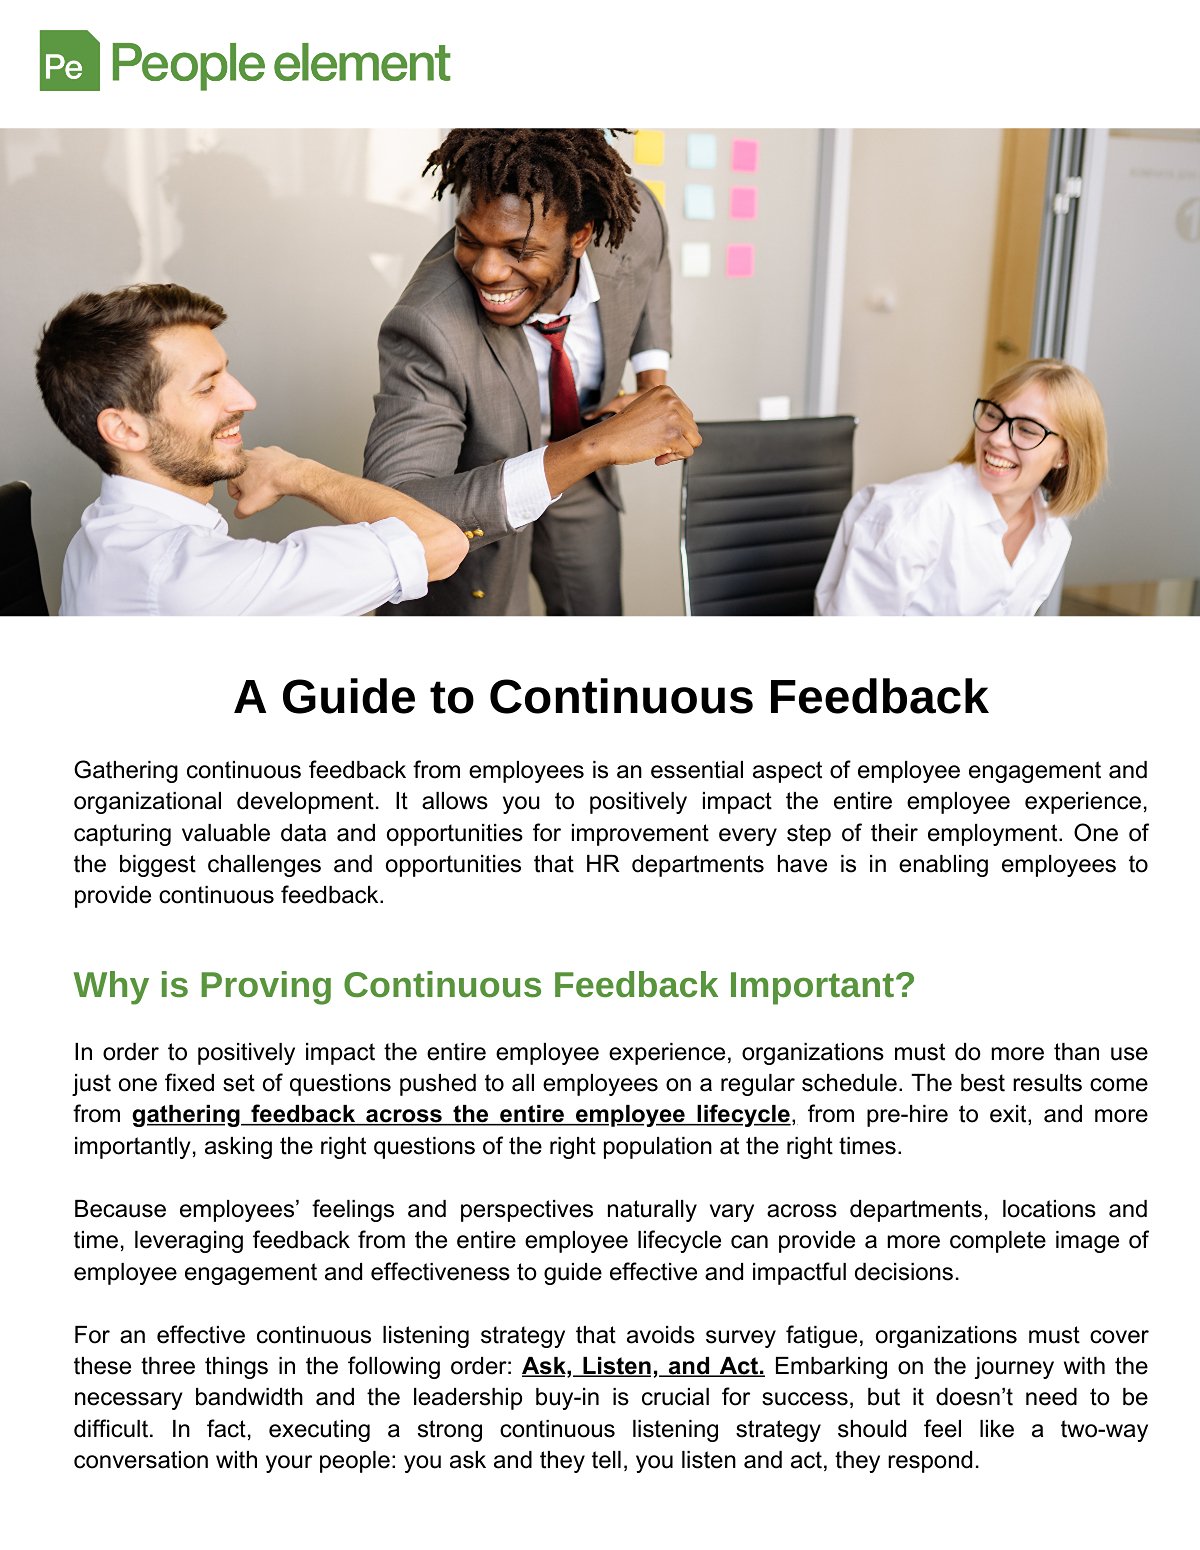 A Guide to Continuous Feedback